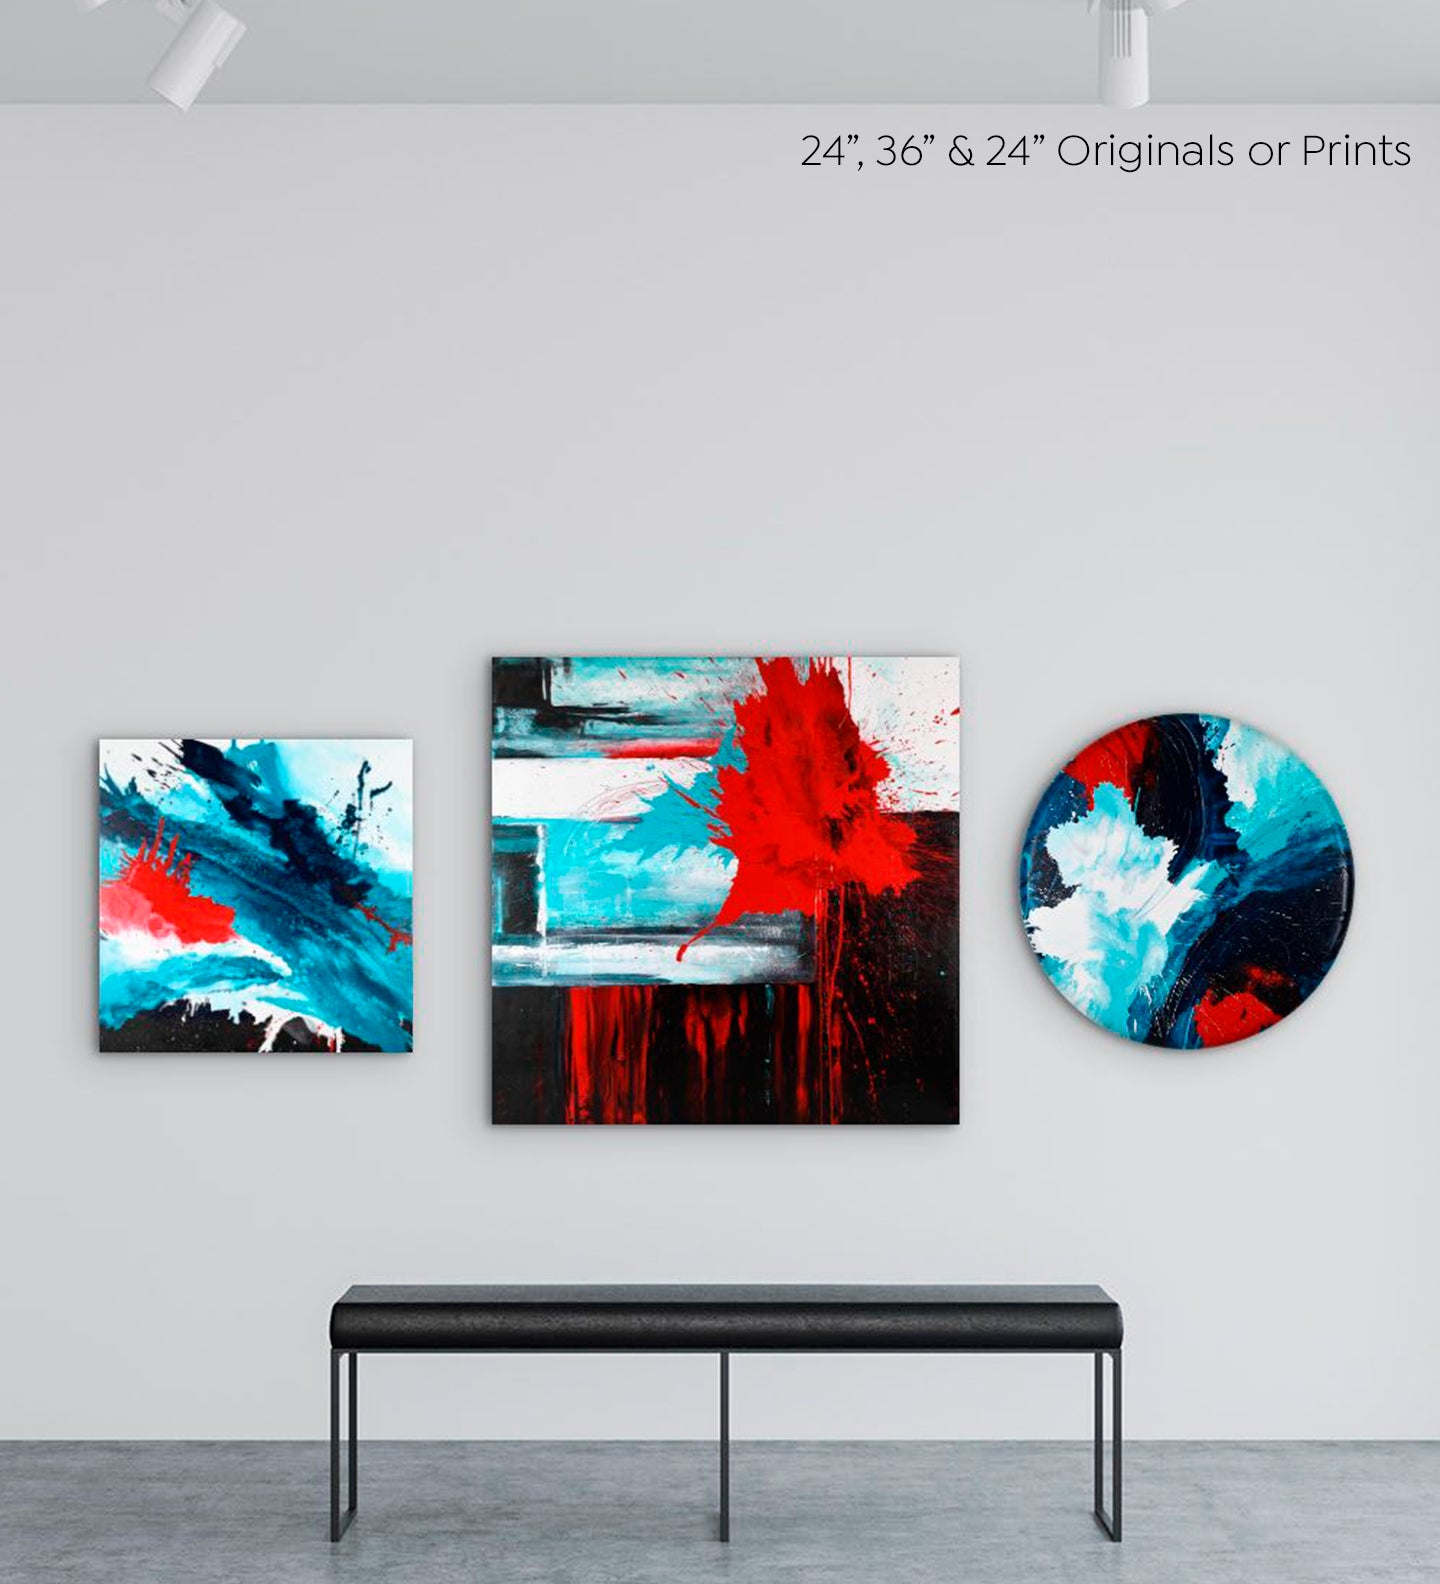 Abstract Expressionism acrylic 24” print or original (on the right): black, red, bright white and turquoise blue on square Convexo, curved-edge canvas on white gallery wall with two other paintings from the same series.